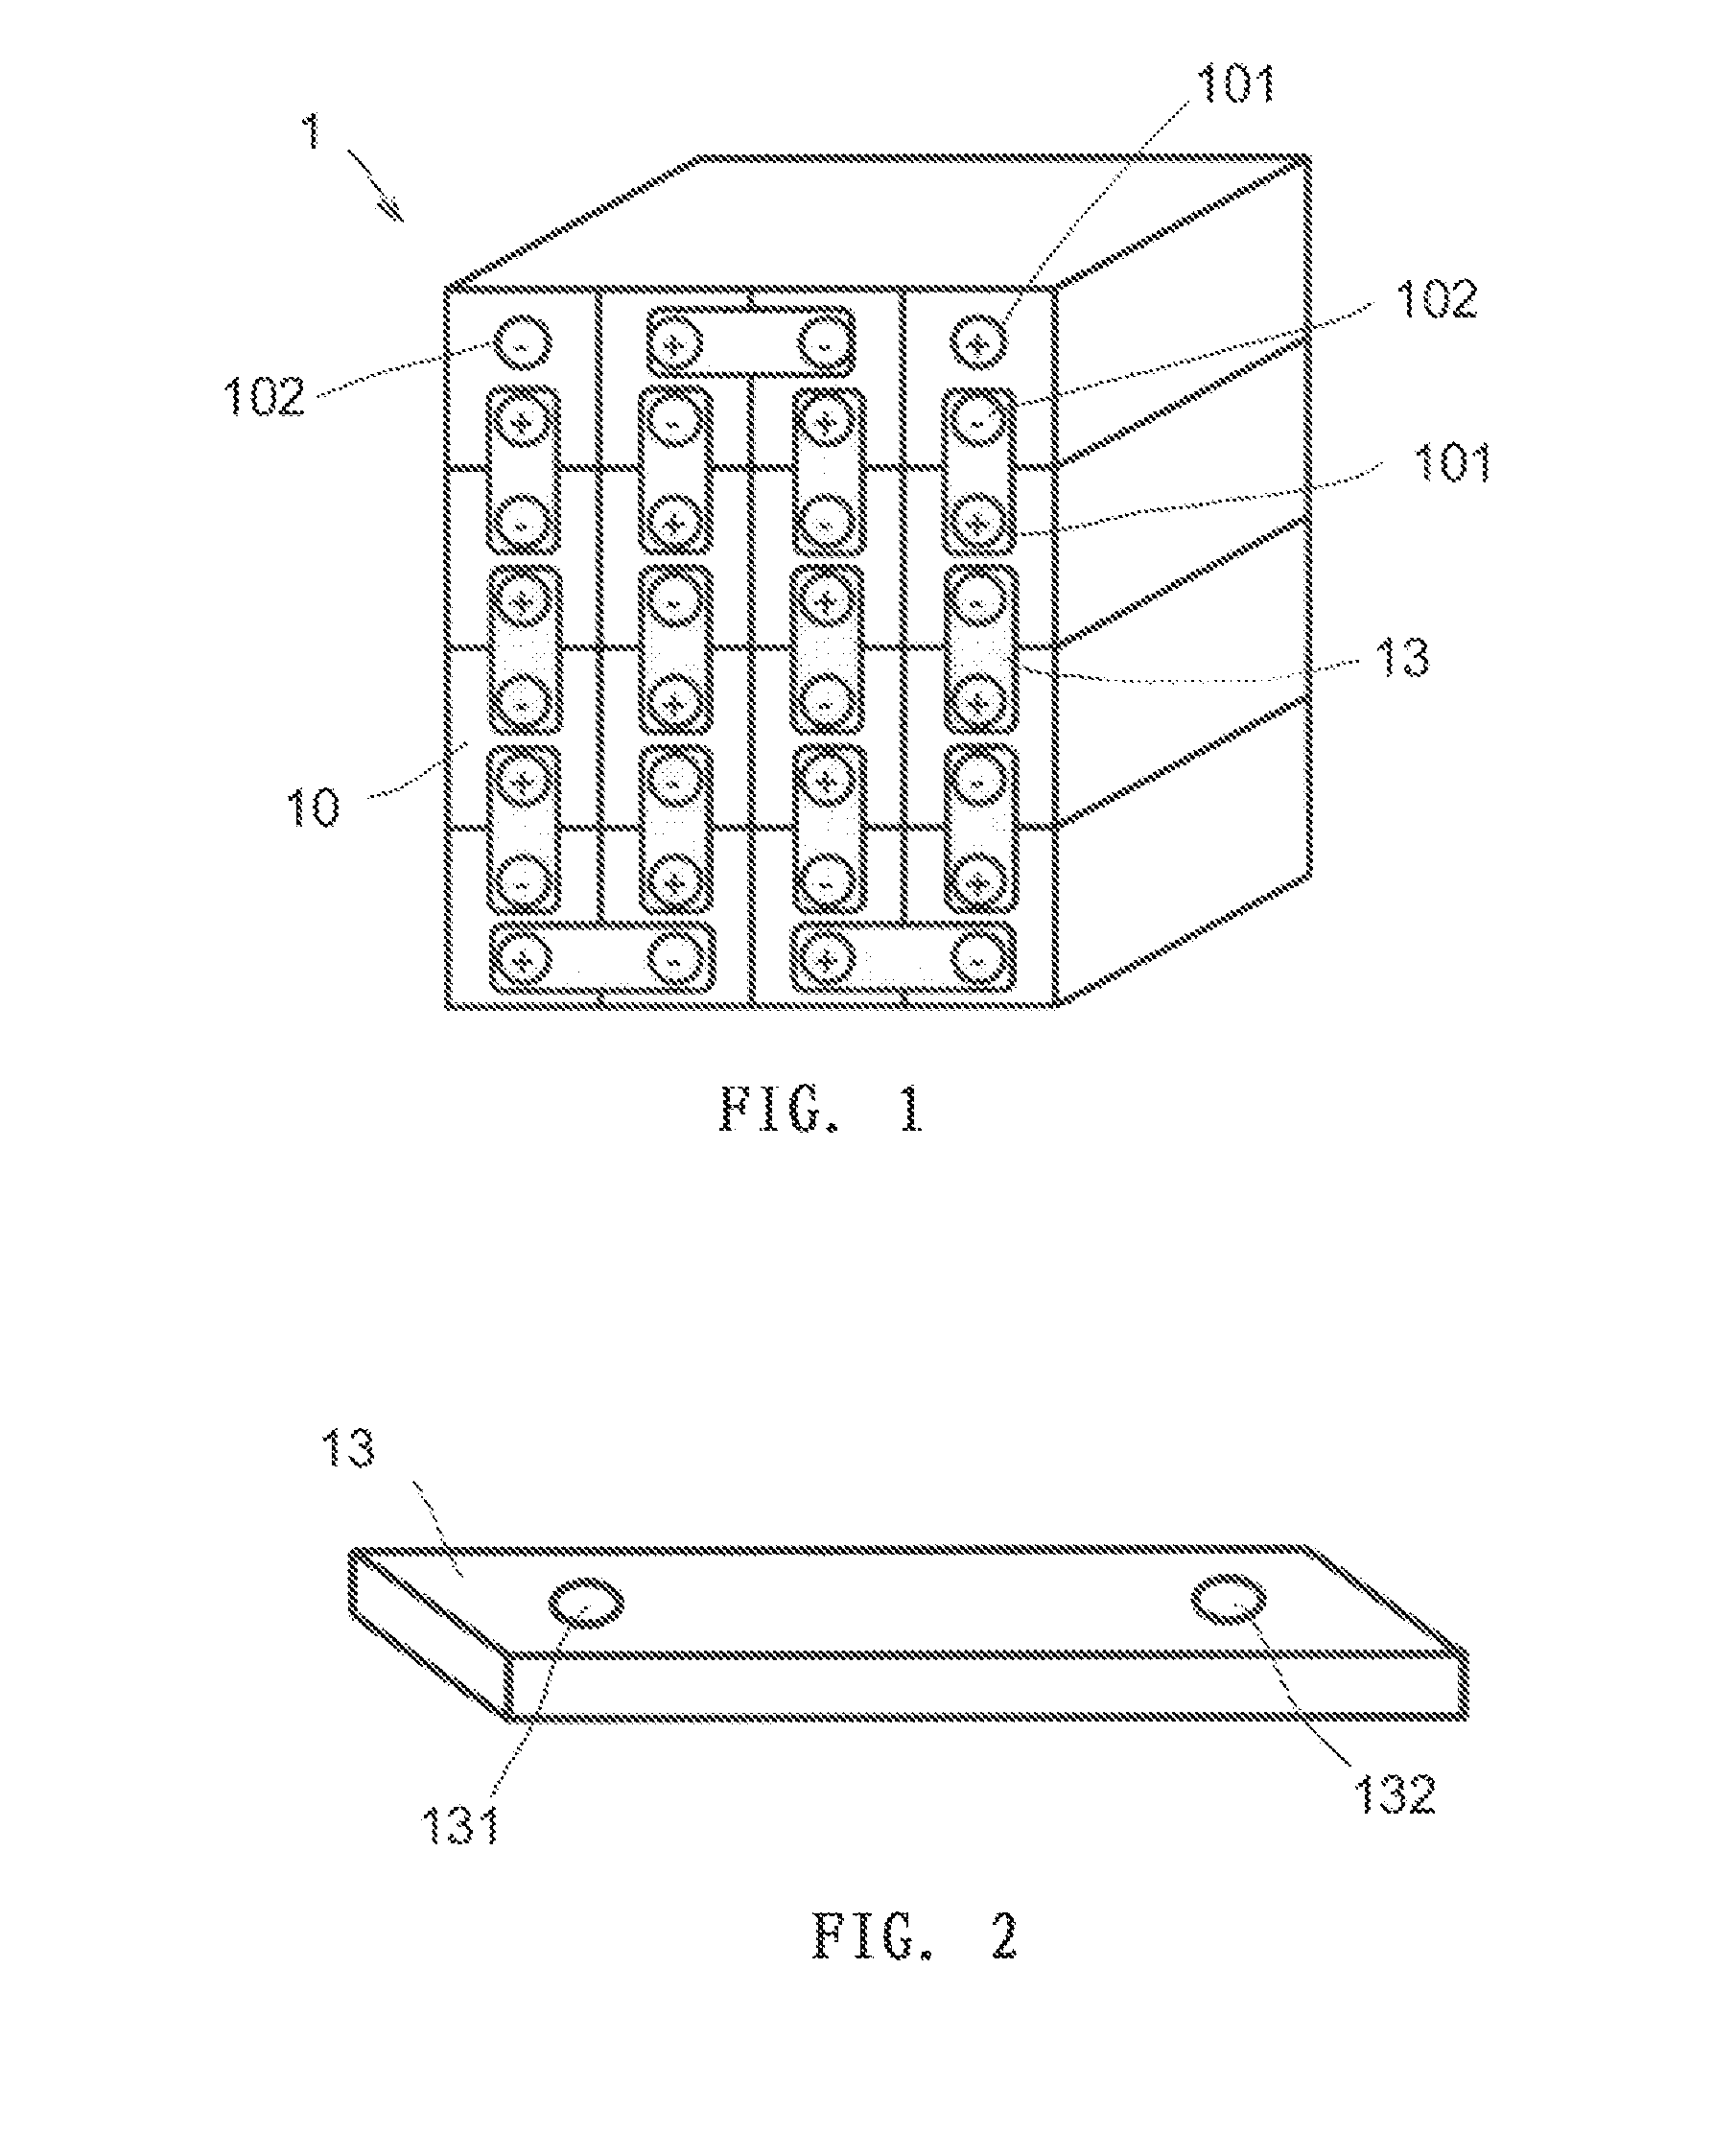 Energy Storage System Preventing Self from Overheating, a Method for Preventing Energy Storage System from Overheating and a Method for Forming A Heat Dissipation Coating on Energy Storage System